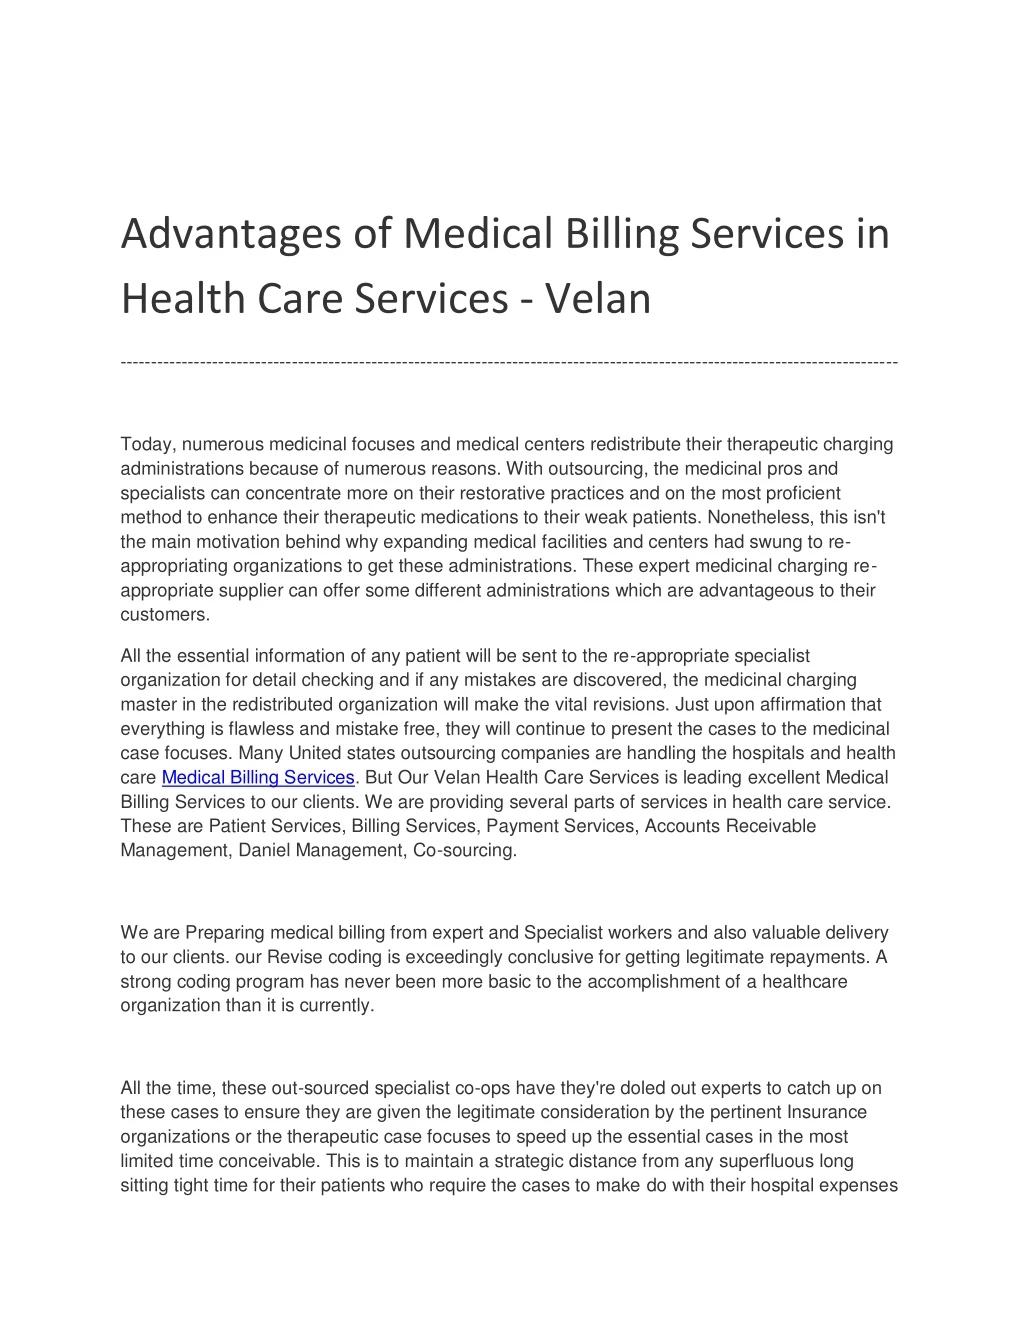 advantages of medical billing services in health